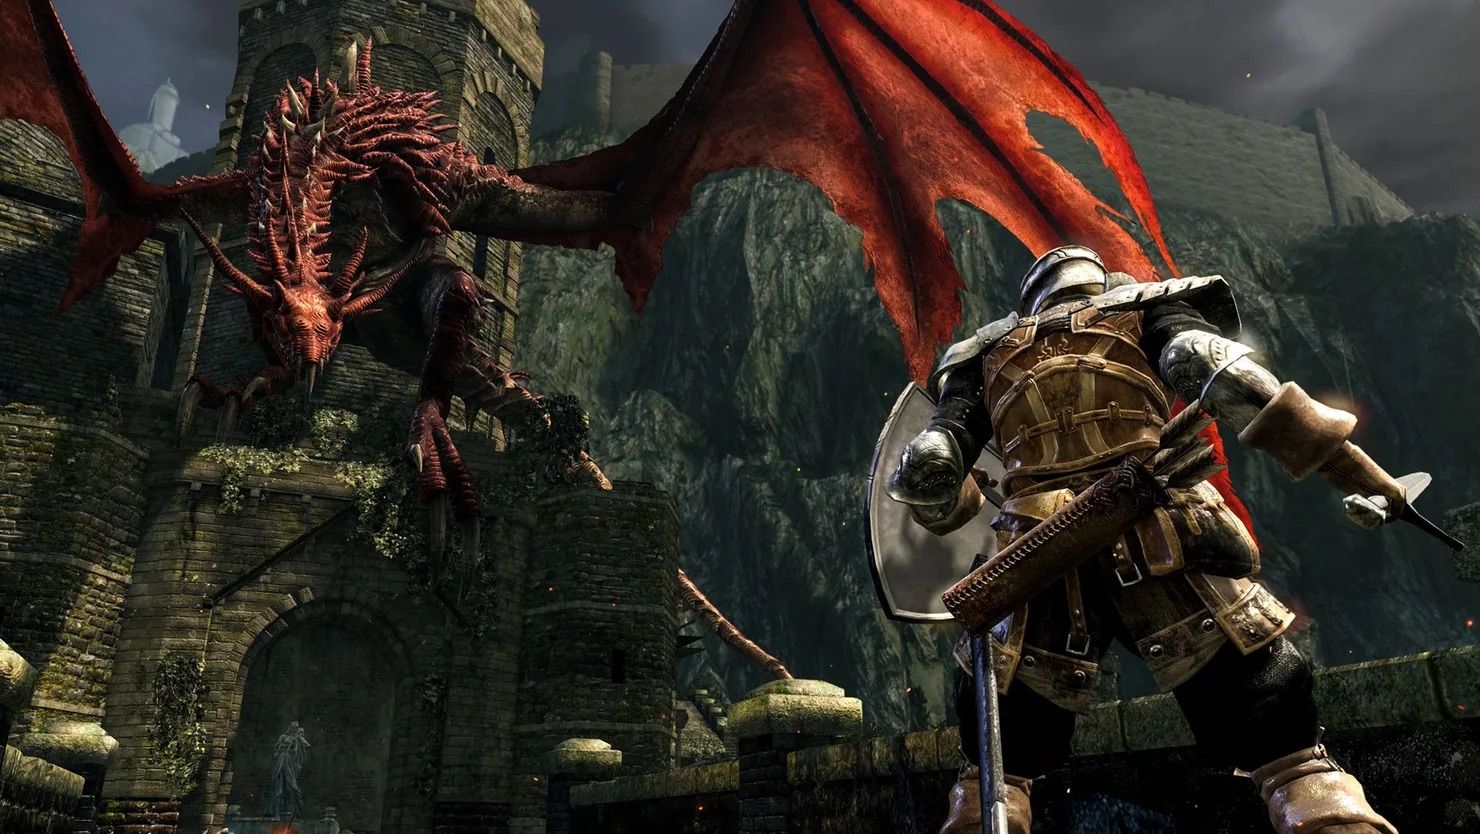 A warrior in armor with a sword and shield fighting a red dragon in a castle from the video game Dark Souls Remastered.